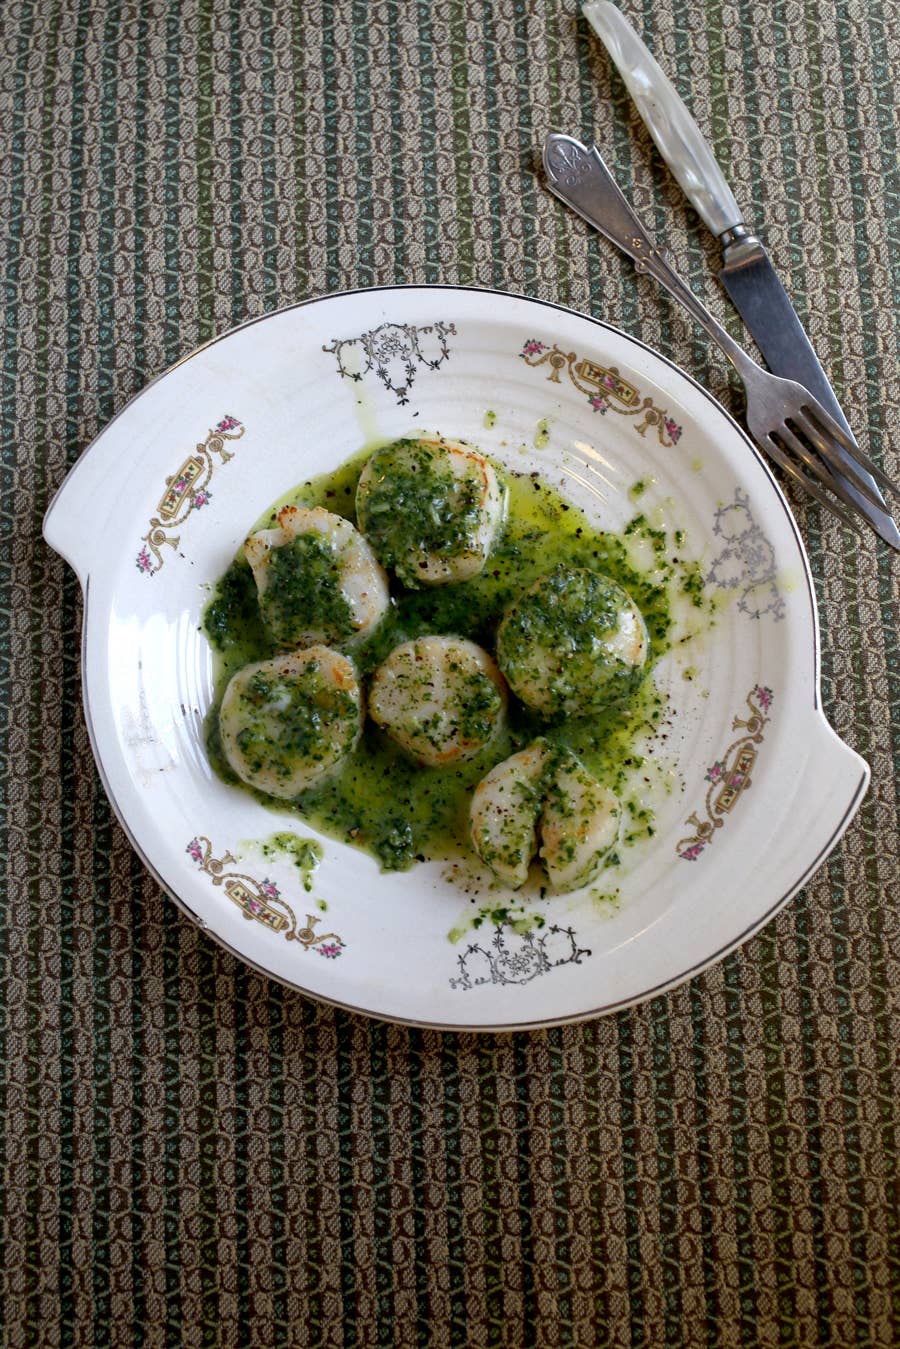 Seared Scallops with Wasabi-Ginger Butter